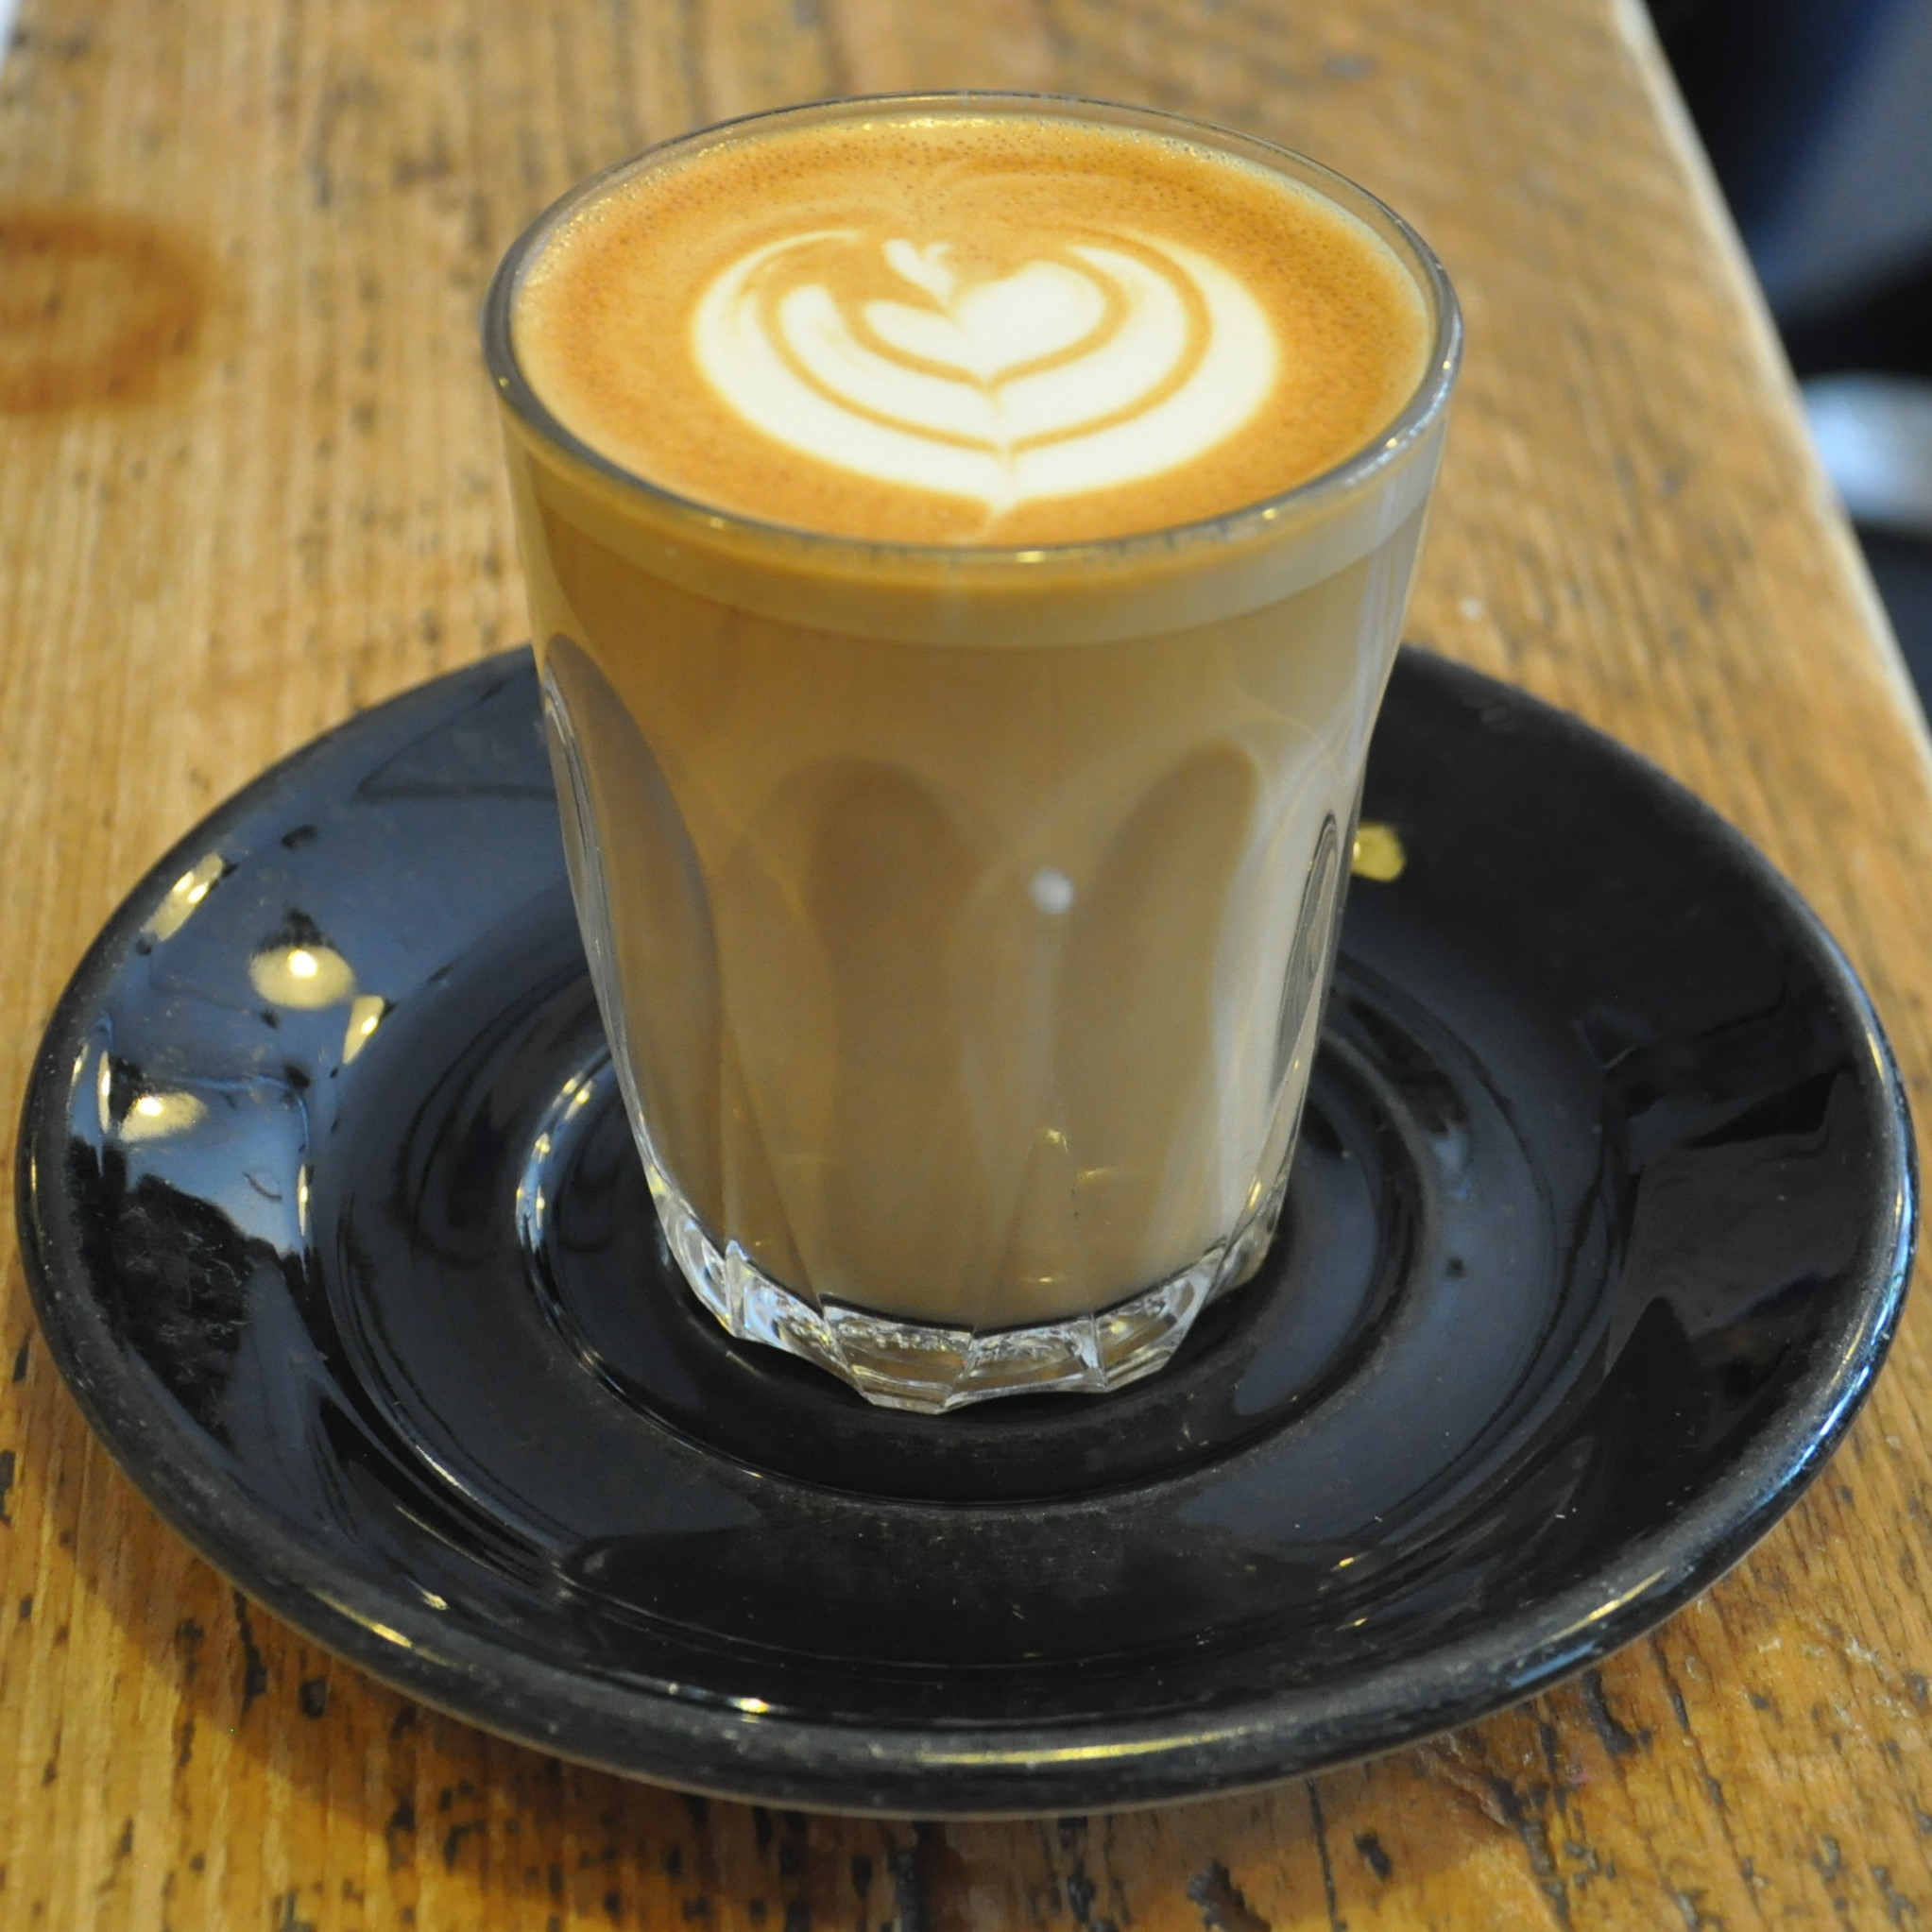 A lovely flat white from Brew Coffee Co, made with a Honduran single-origin, roasted by Clifton Coffee Co, and served in a glass.